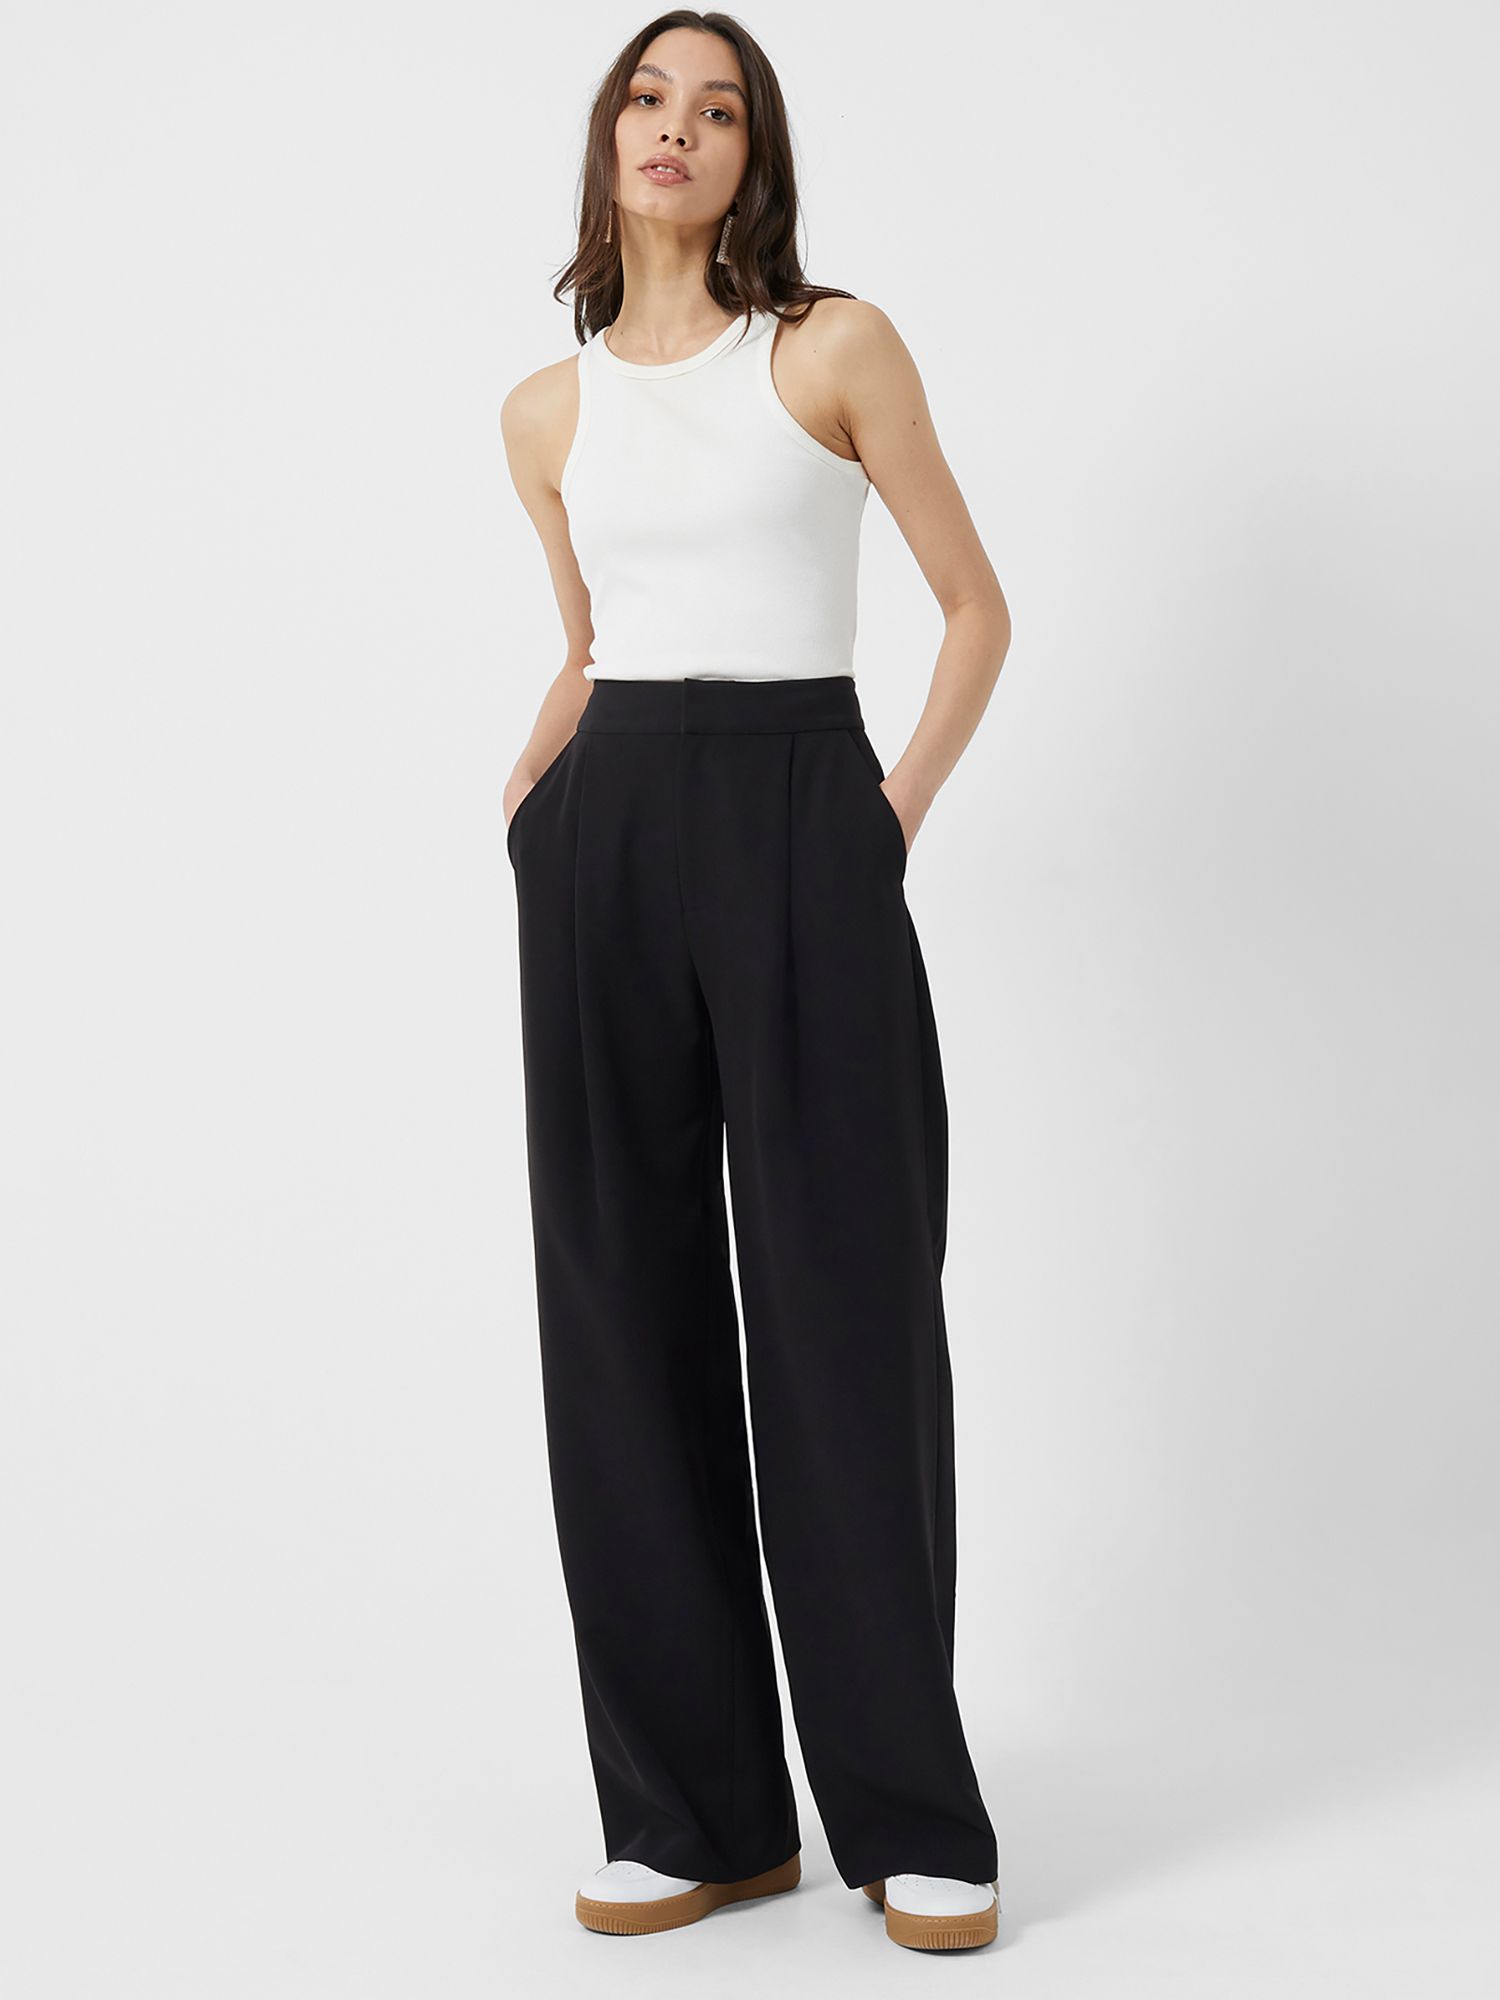 French Connection Ame Wide Leg Suit Trousers, Black, 6